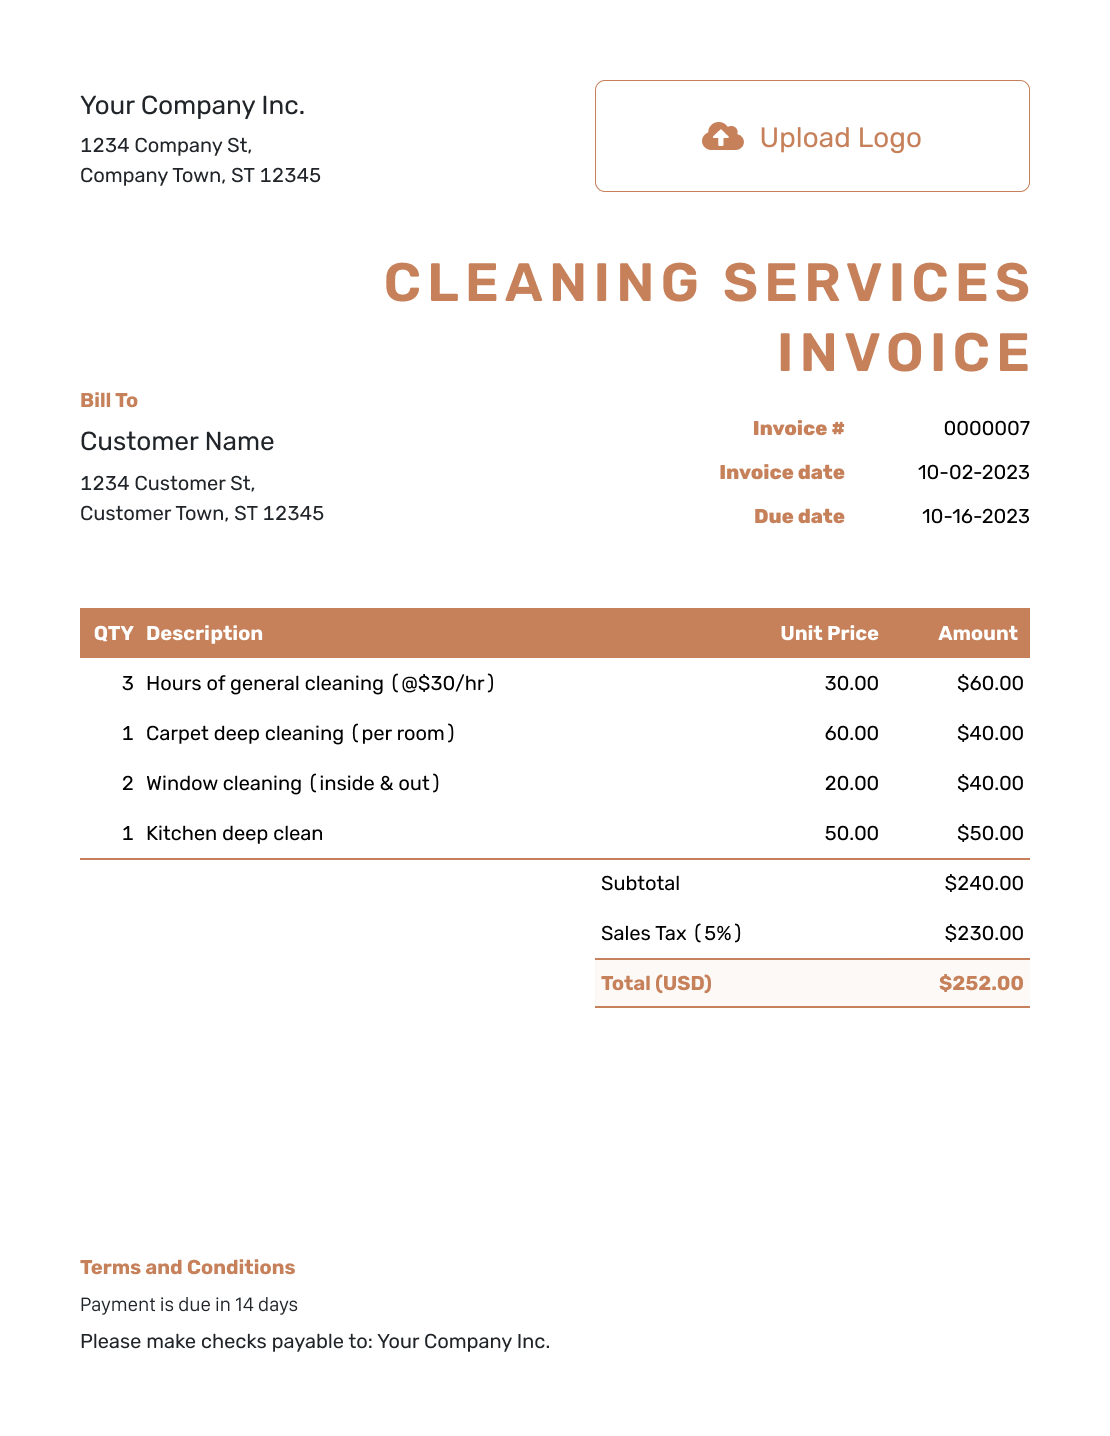 Standard Cleaning Services Invoice Template